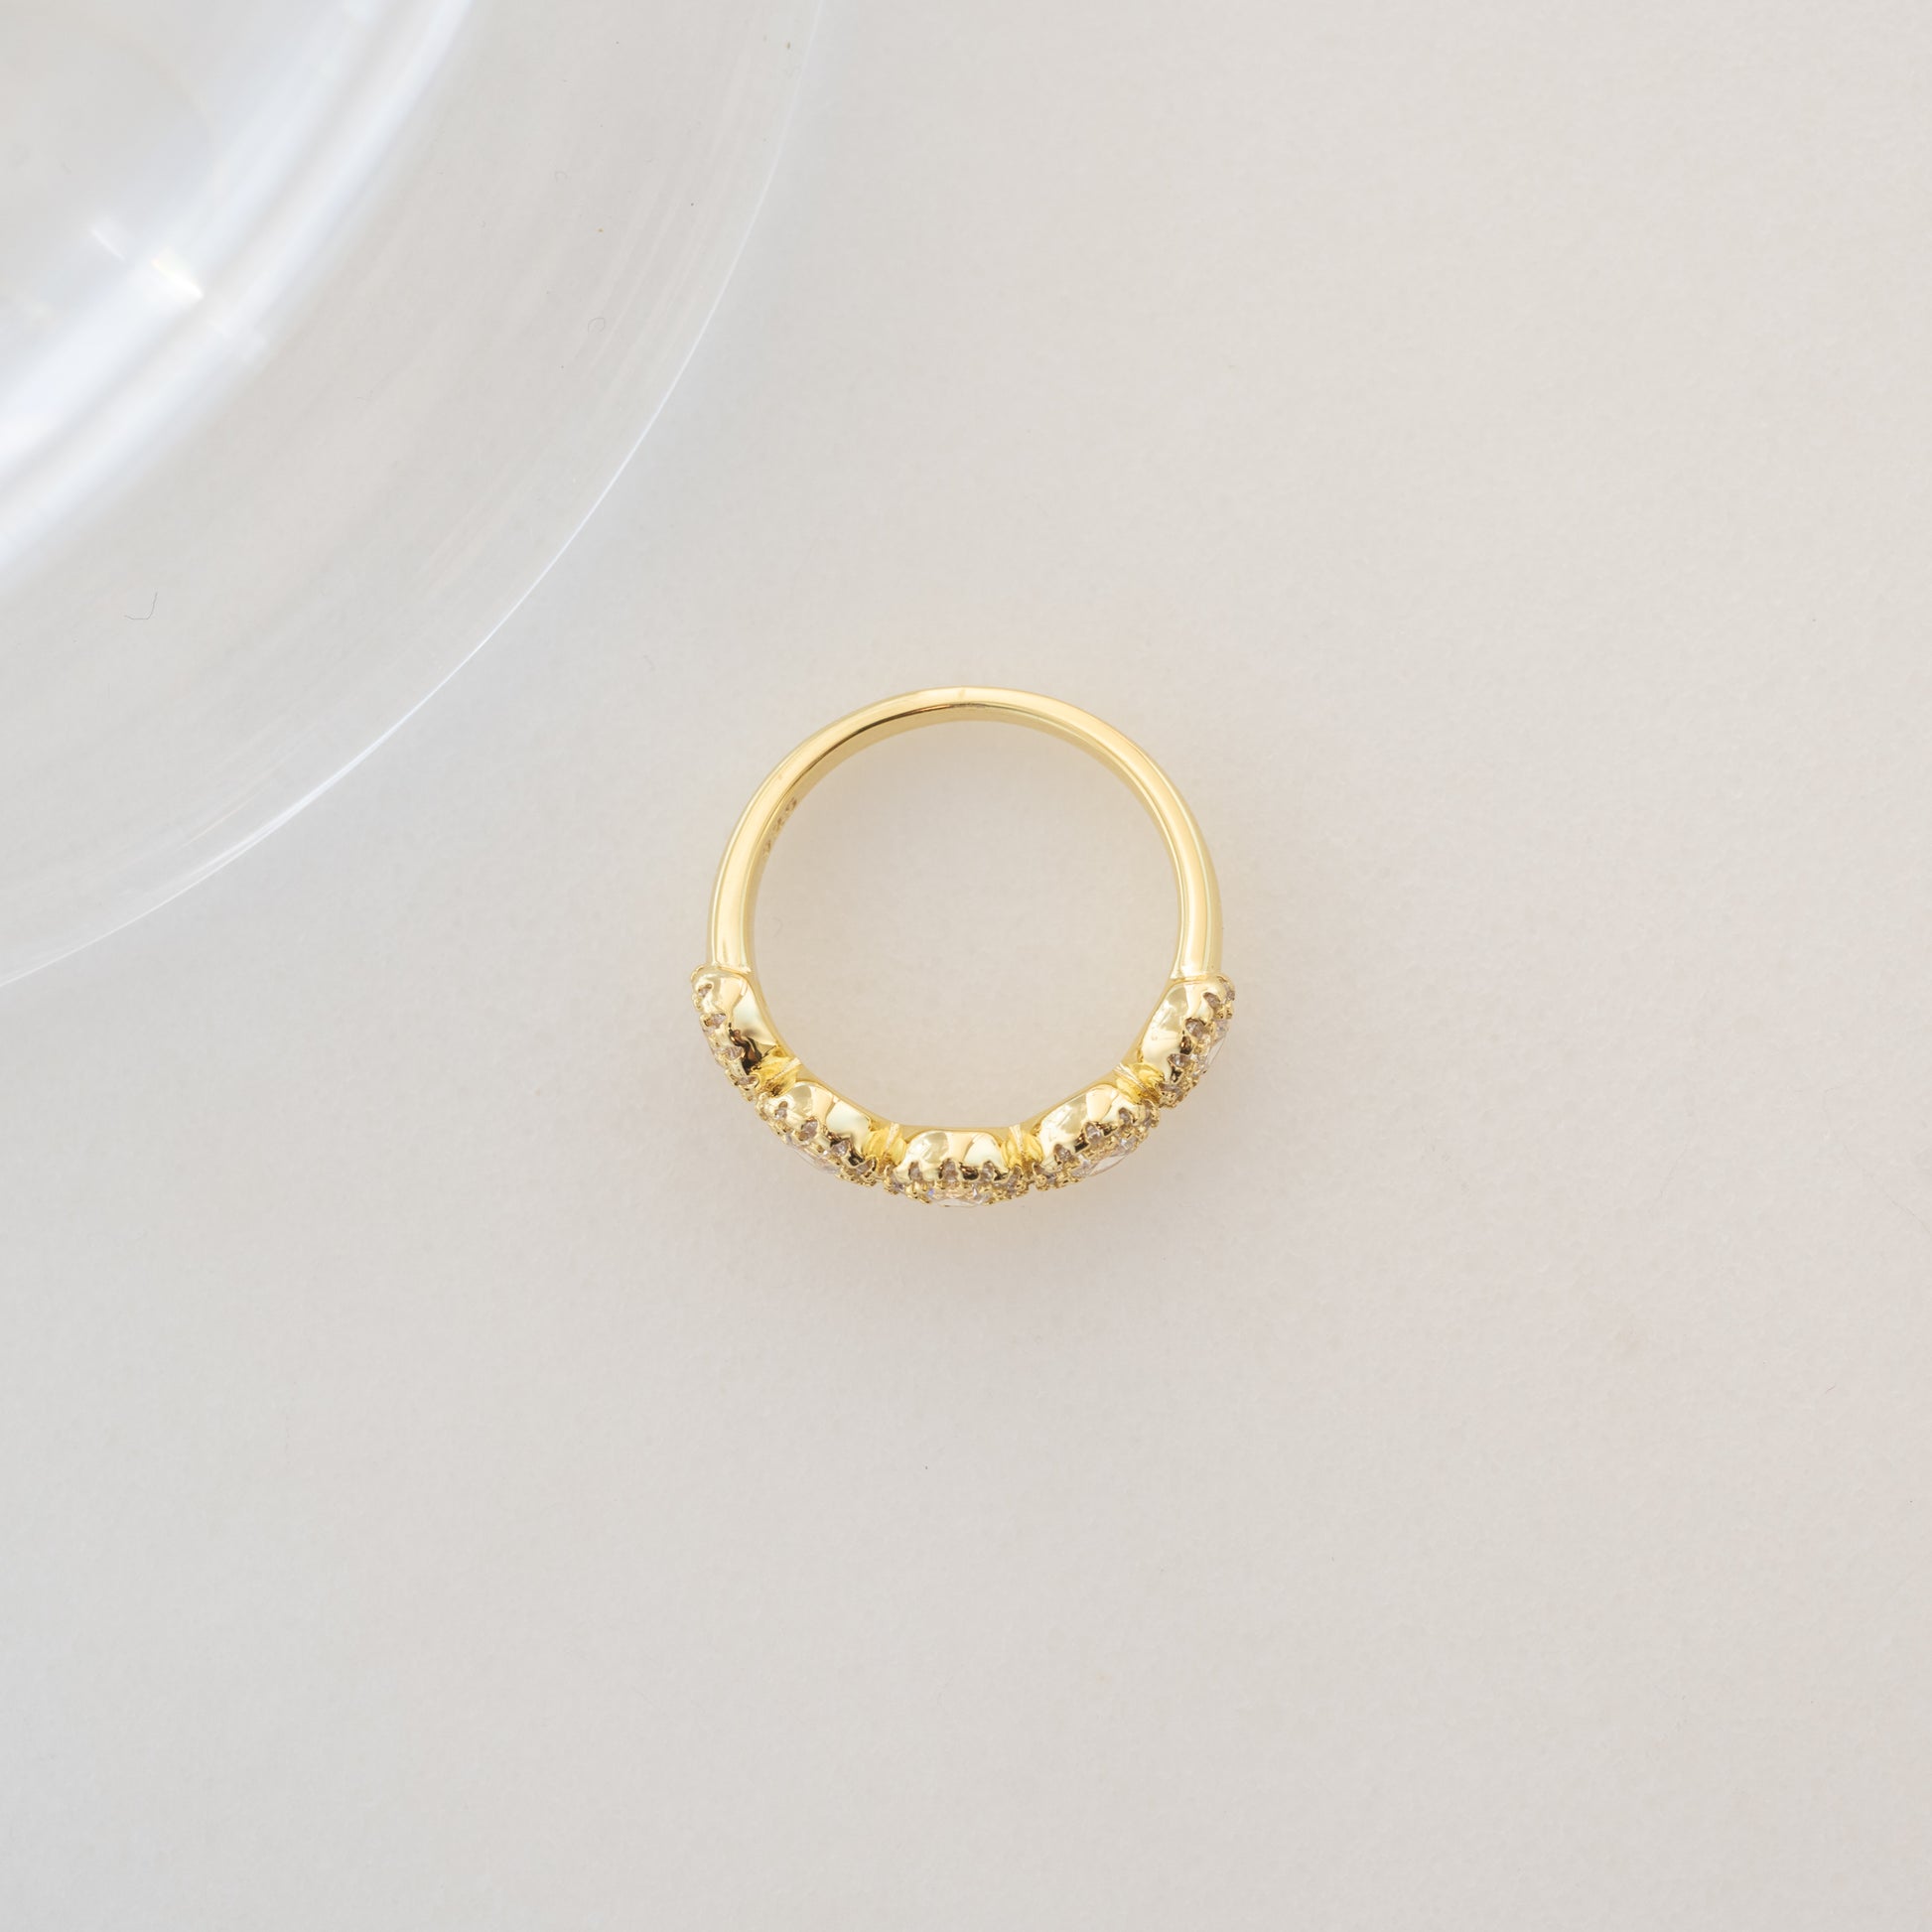 birds eye view of a gold ring